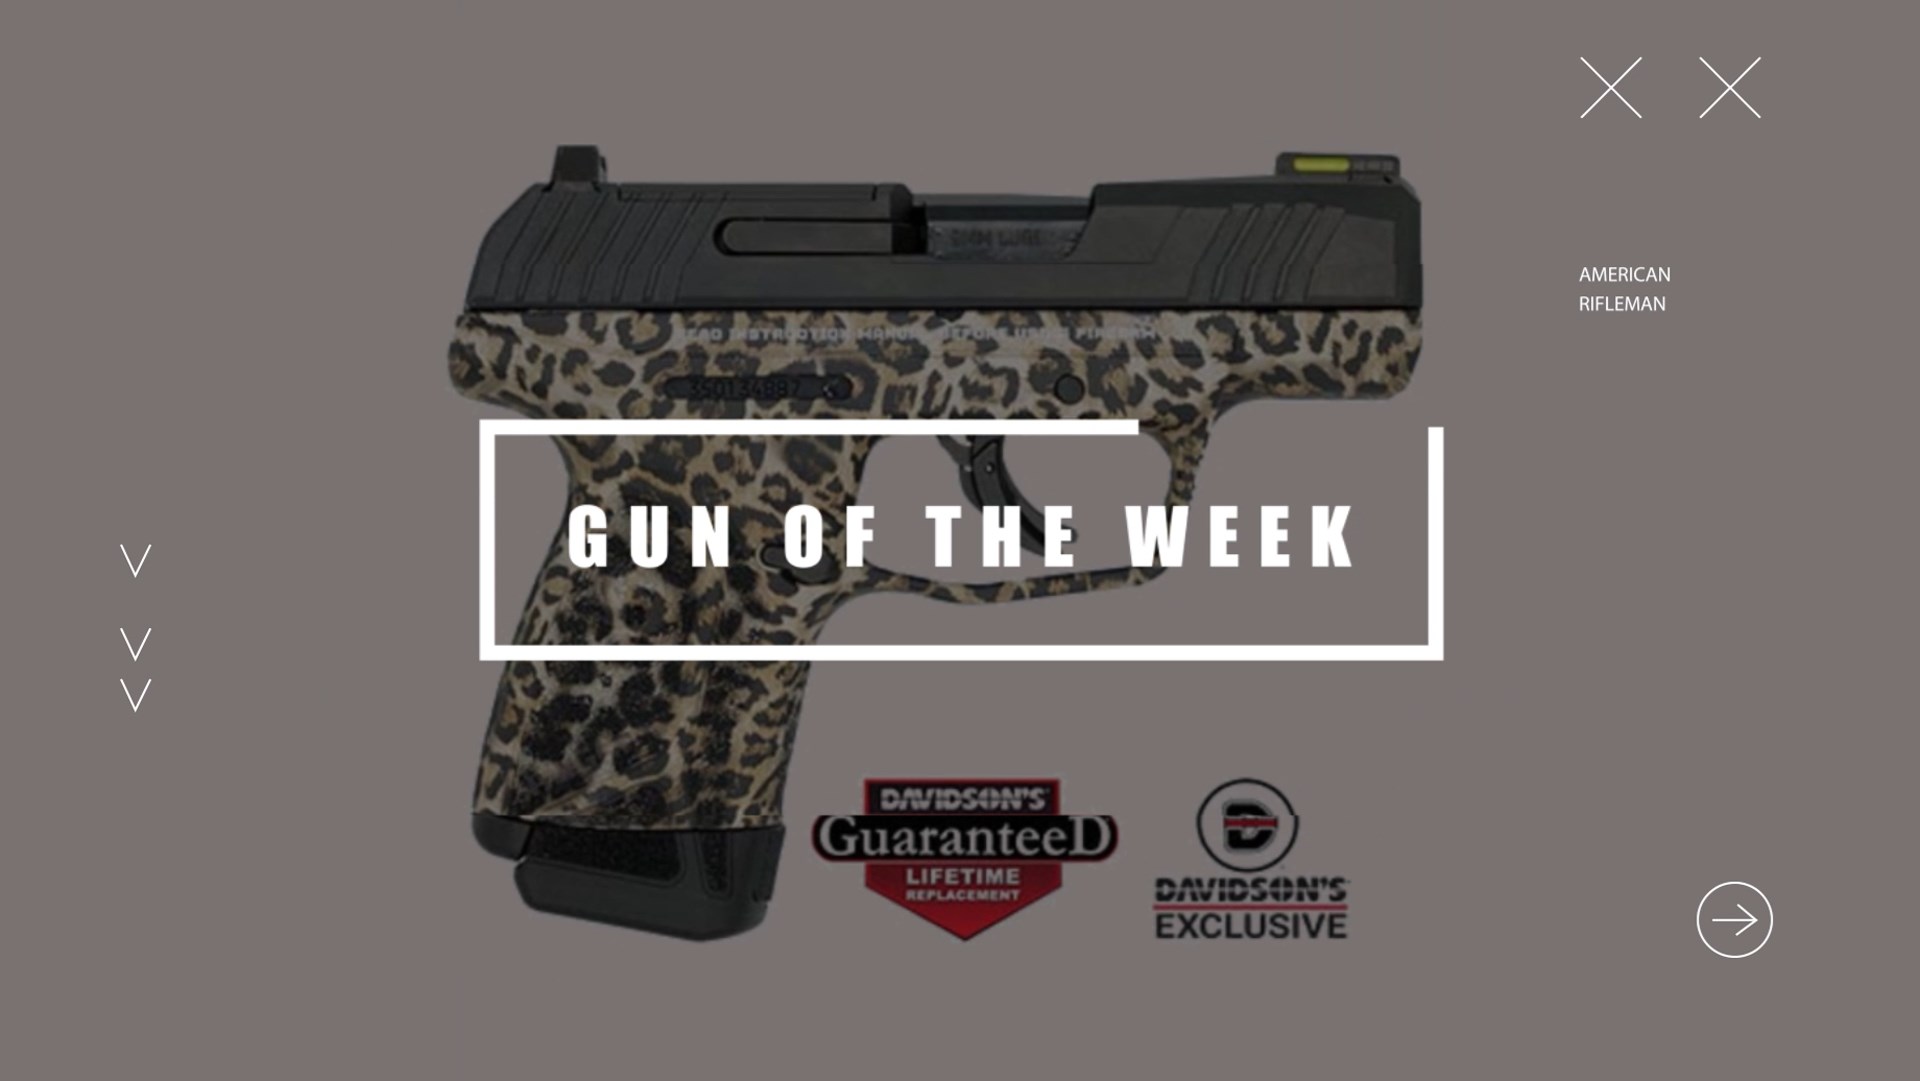 GUN OF THE WEEK title screen text on image leopard print gun ruger max-9 optc-ready micro-compact pistol handgun 9 mm luger right side